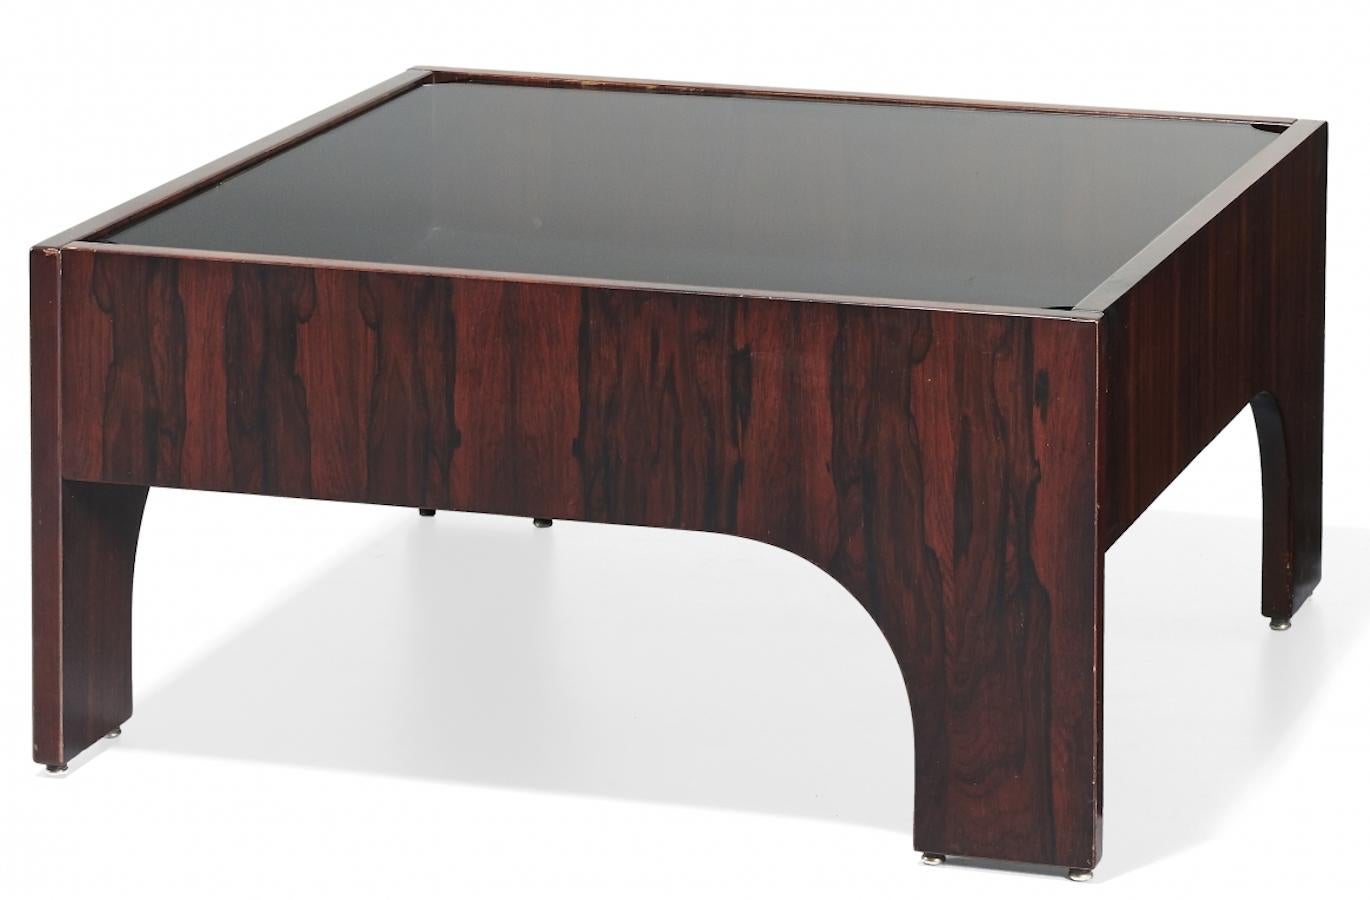 This Oriolo coffee table for Sormani was realized circa 1960s by the Italian designer Claudio Salocchi, (1934-2012).

Composed by a removable glass surface and a rosewood structure.

Dimensions: 42 x 83 x 83 cm.

Excellent condition.